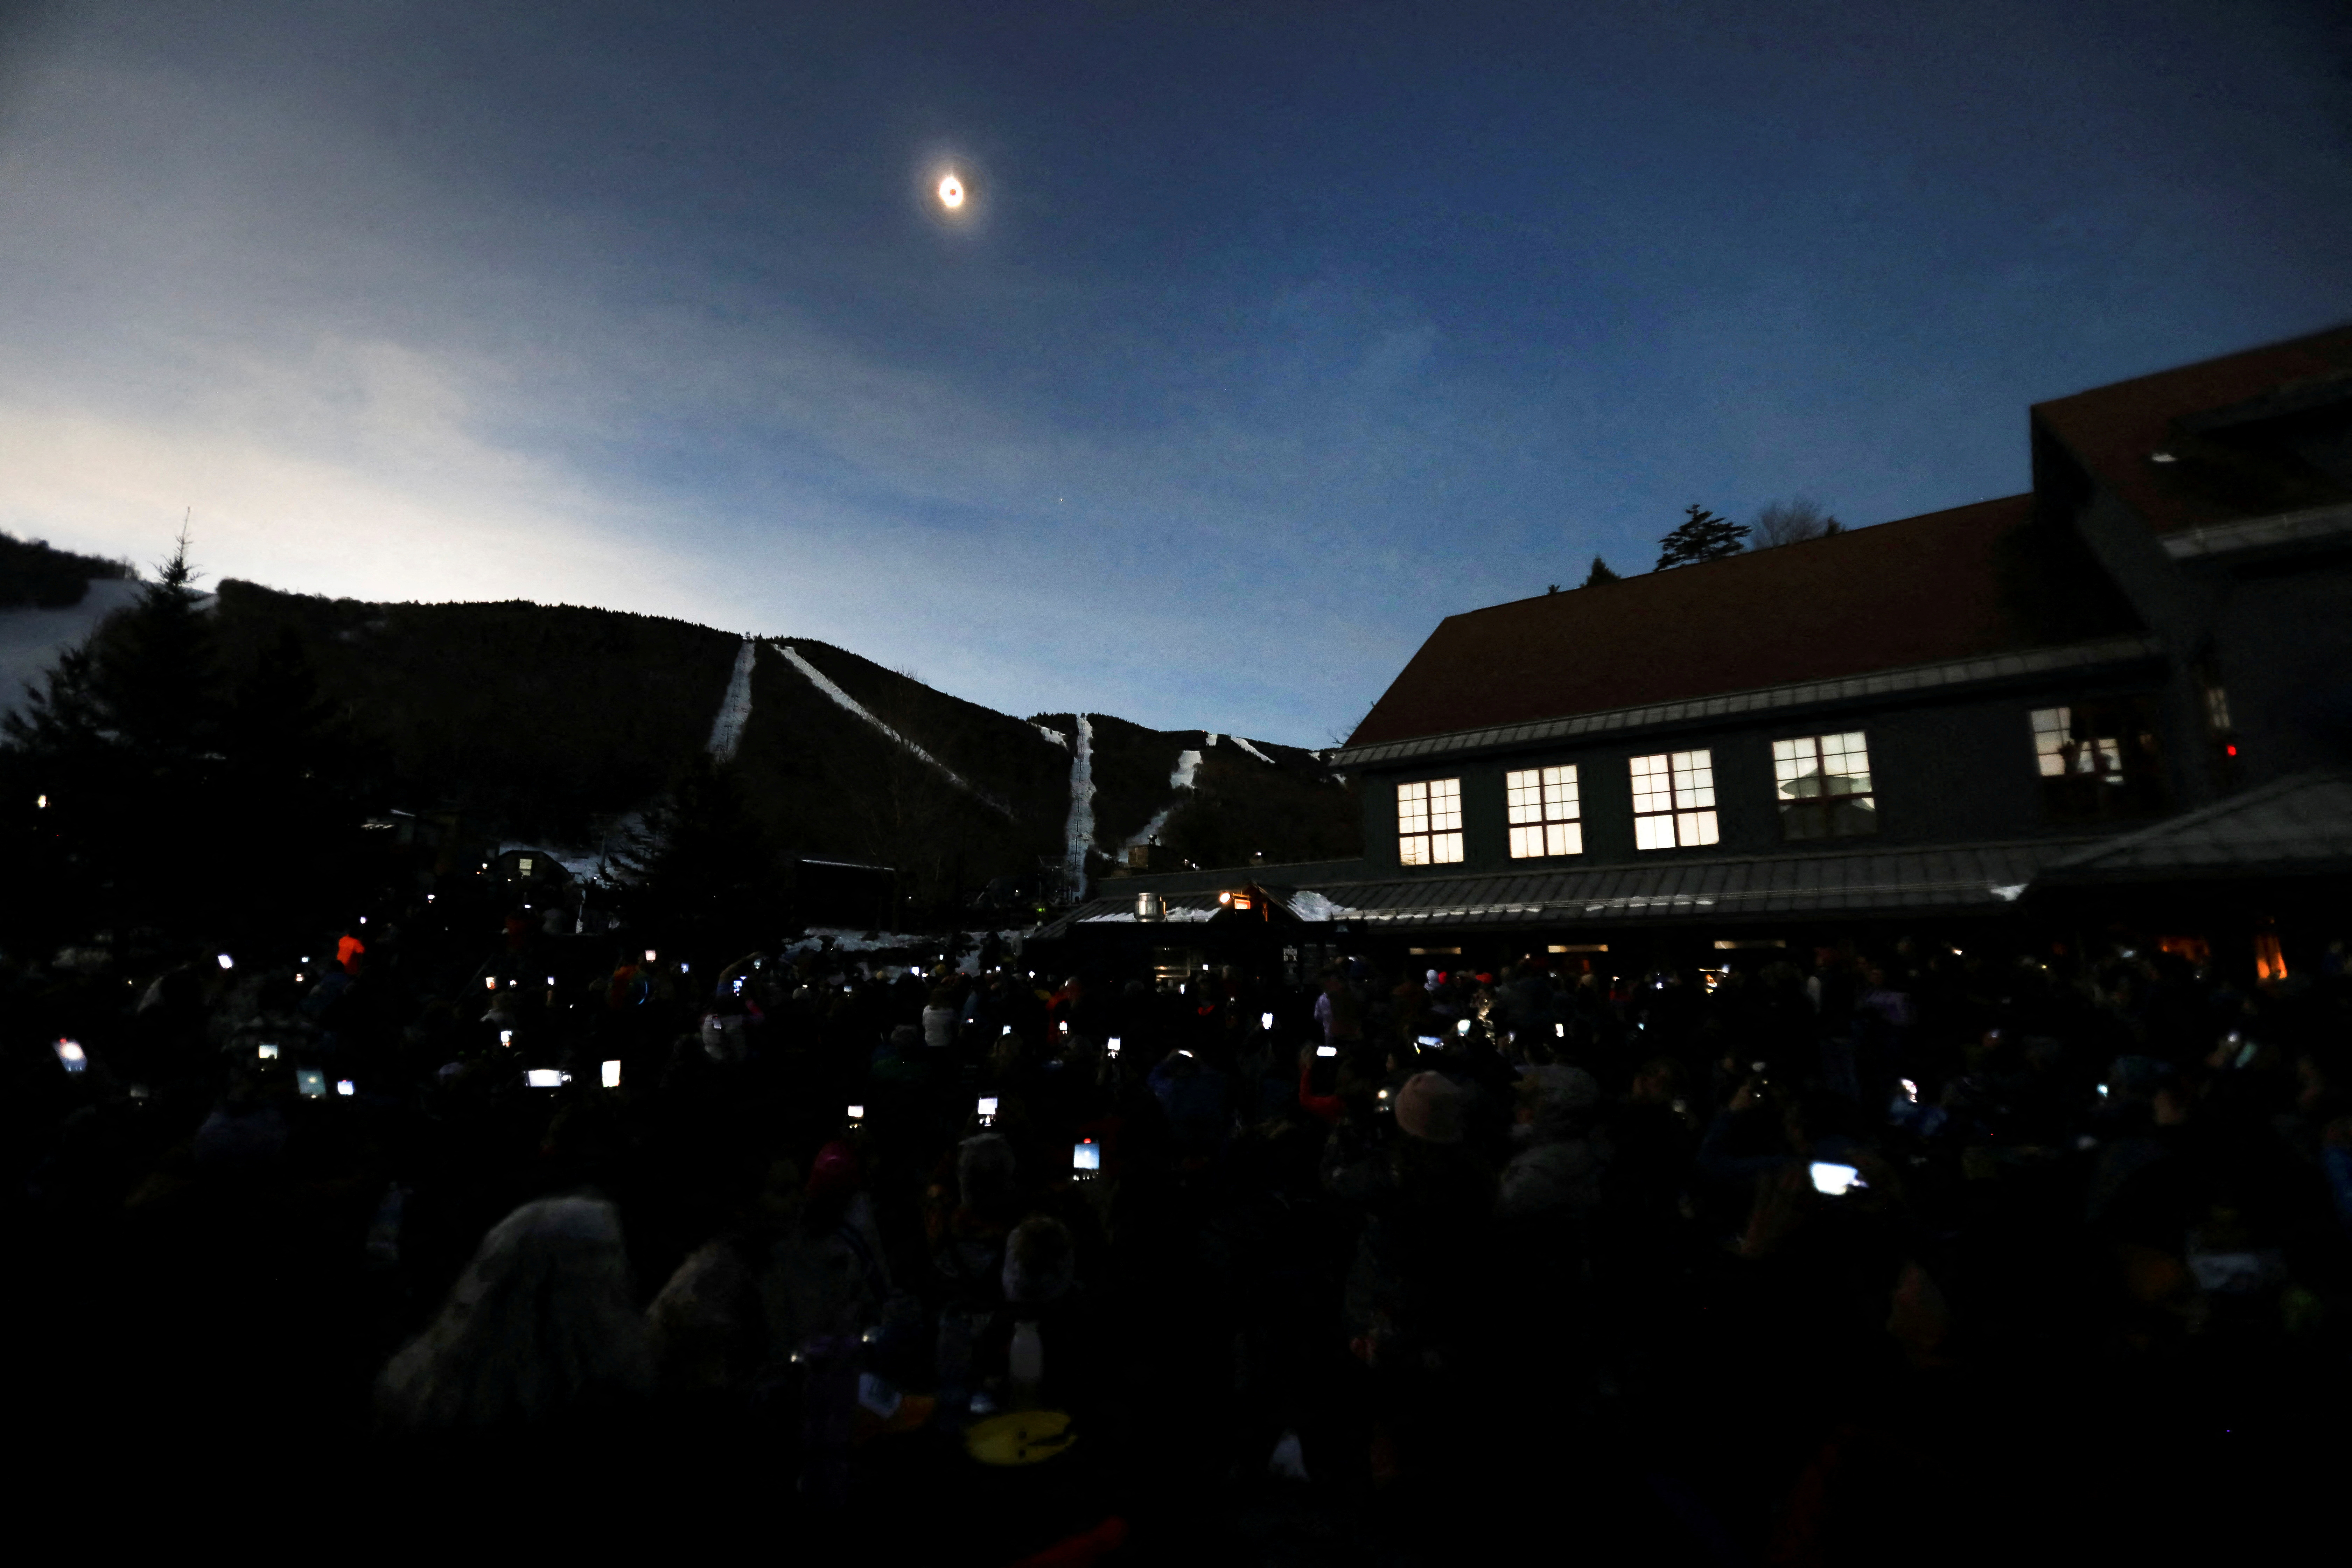 People assemble to view the total solar eclipse at Sugarbush ski resort